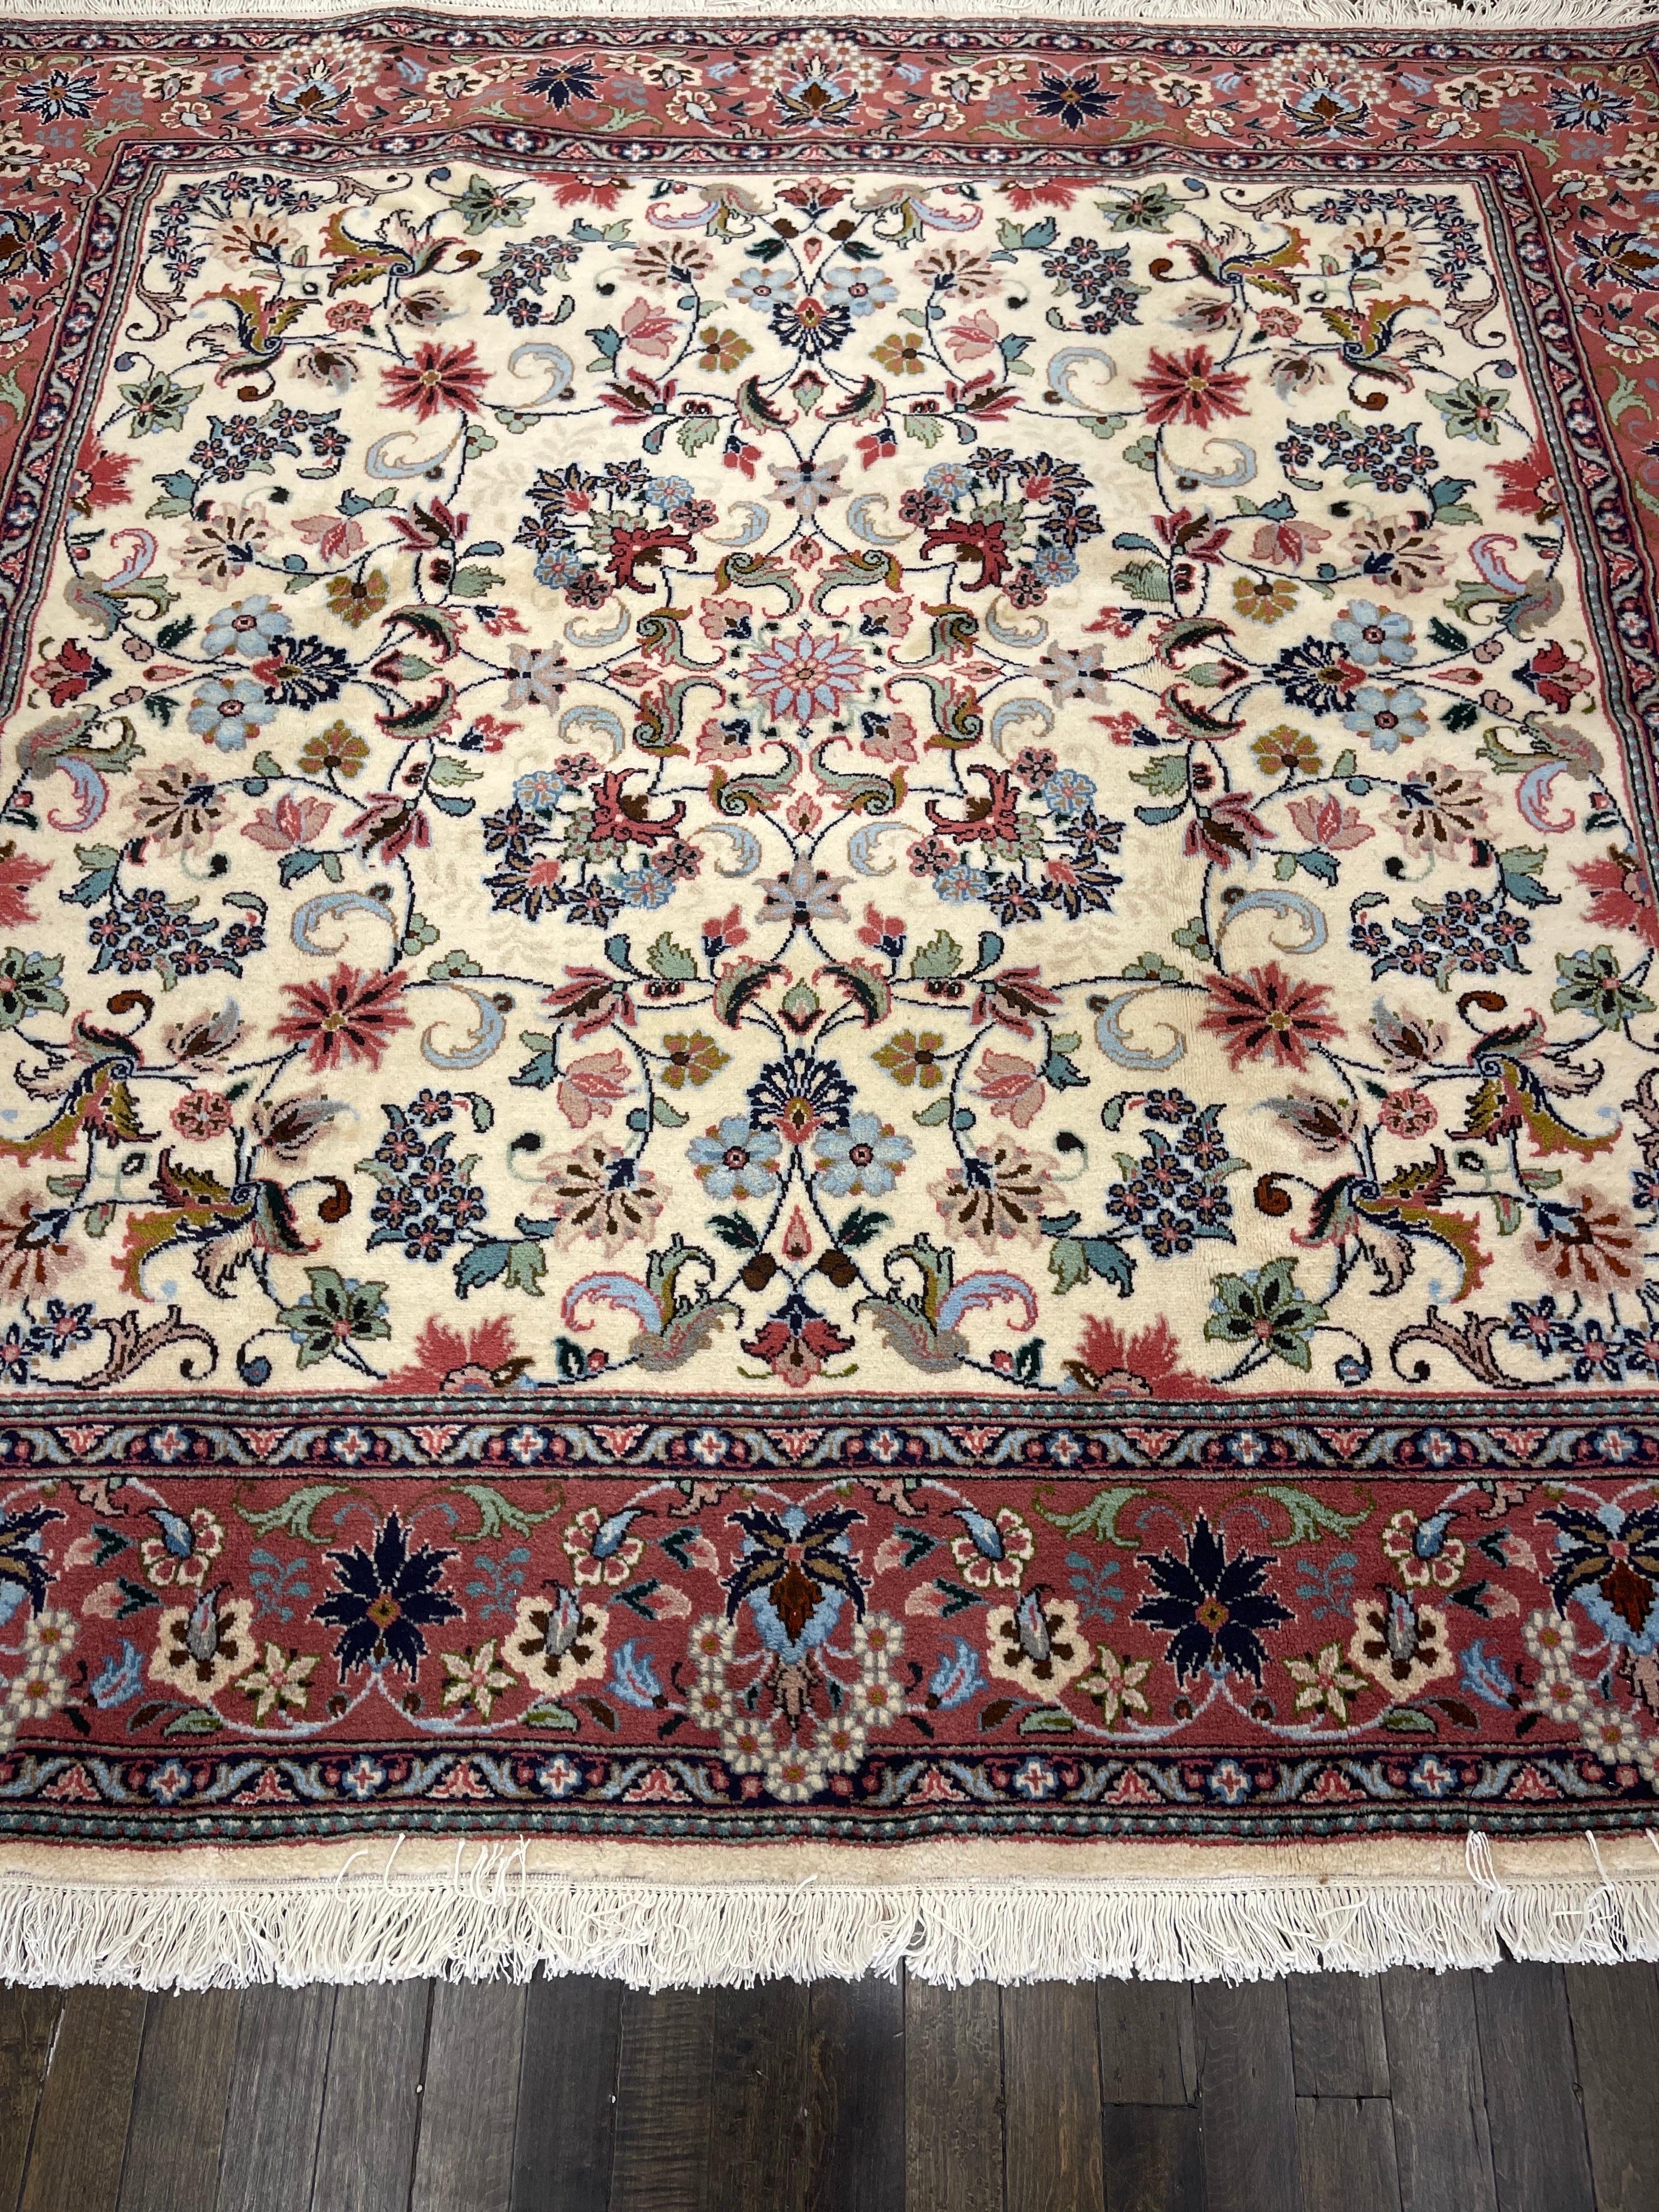 Beautiful hand woven rug made in one of the rug making centers in Iran, this Kashan features an ivory field decorated with flowers and leaves surrounded by a floral peach color border. The radiant colors like dark and light green,indigo and sky